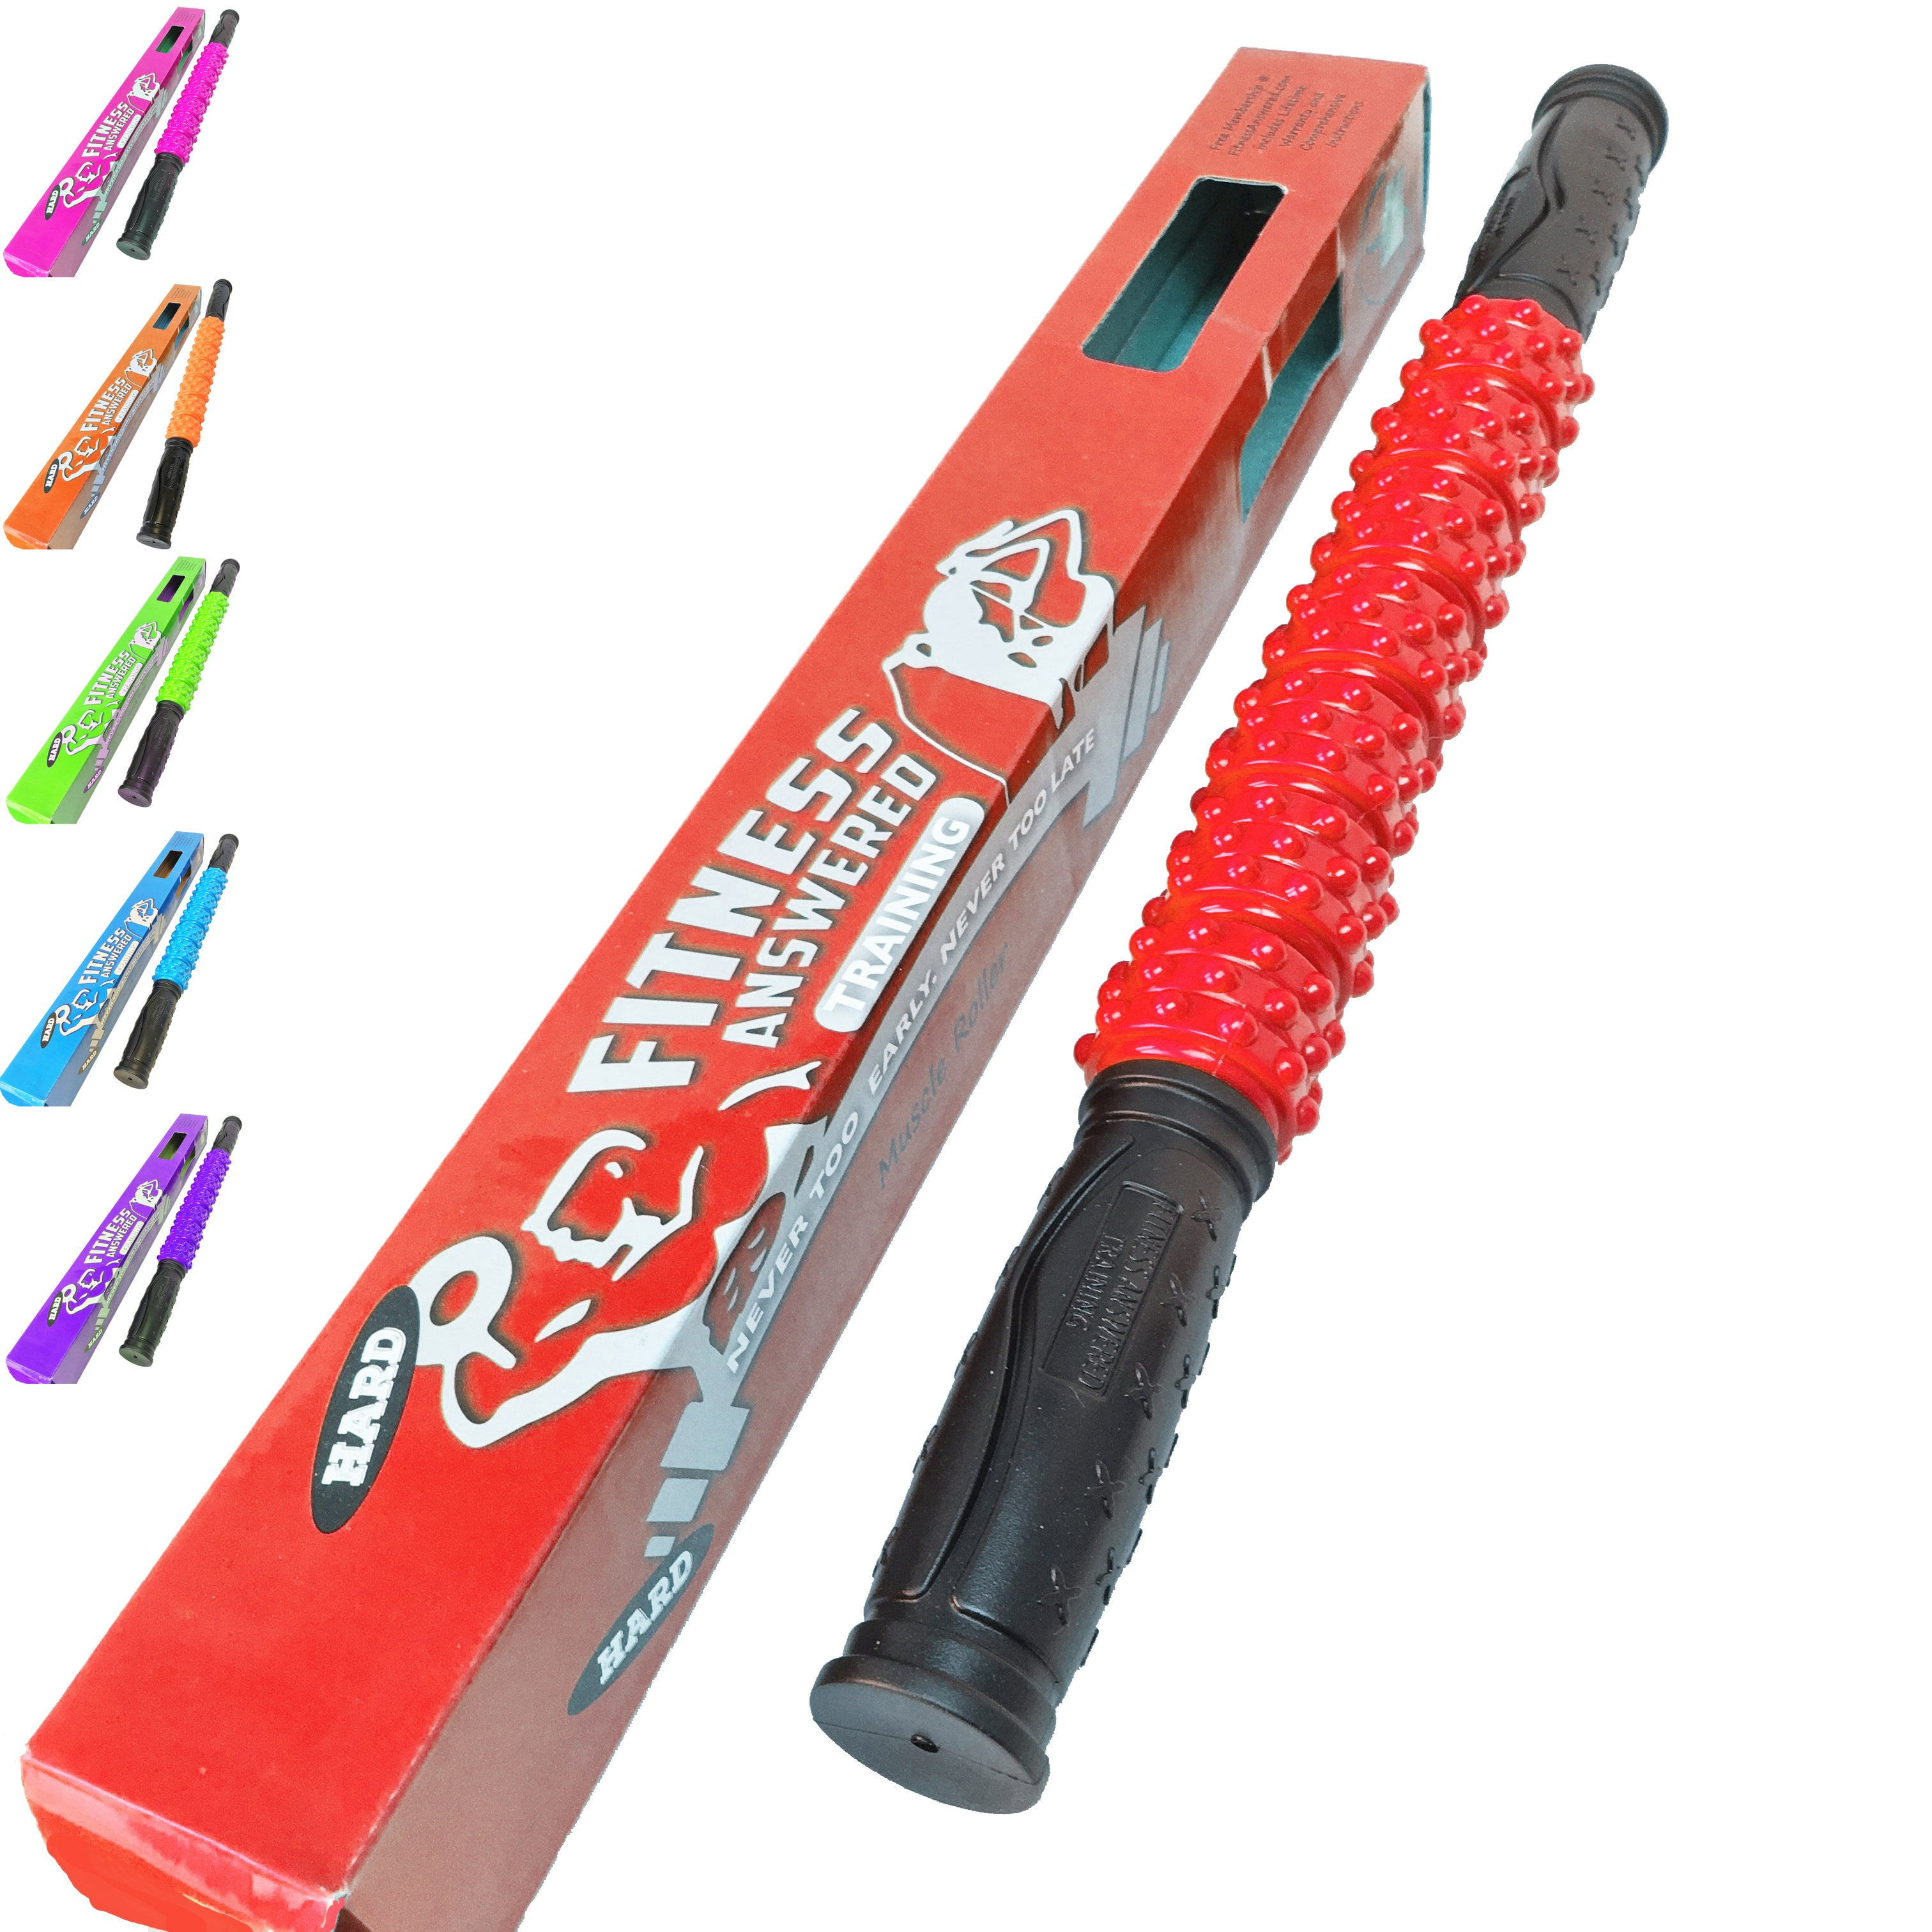 The Muscle Stick Elite Hard Massage Roller Red